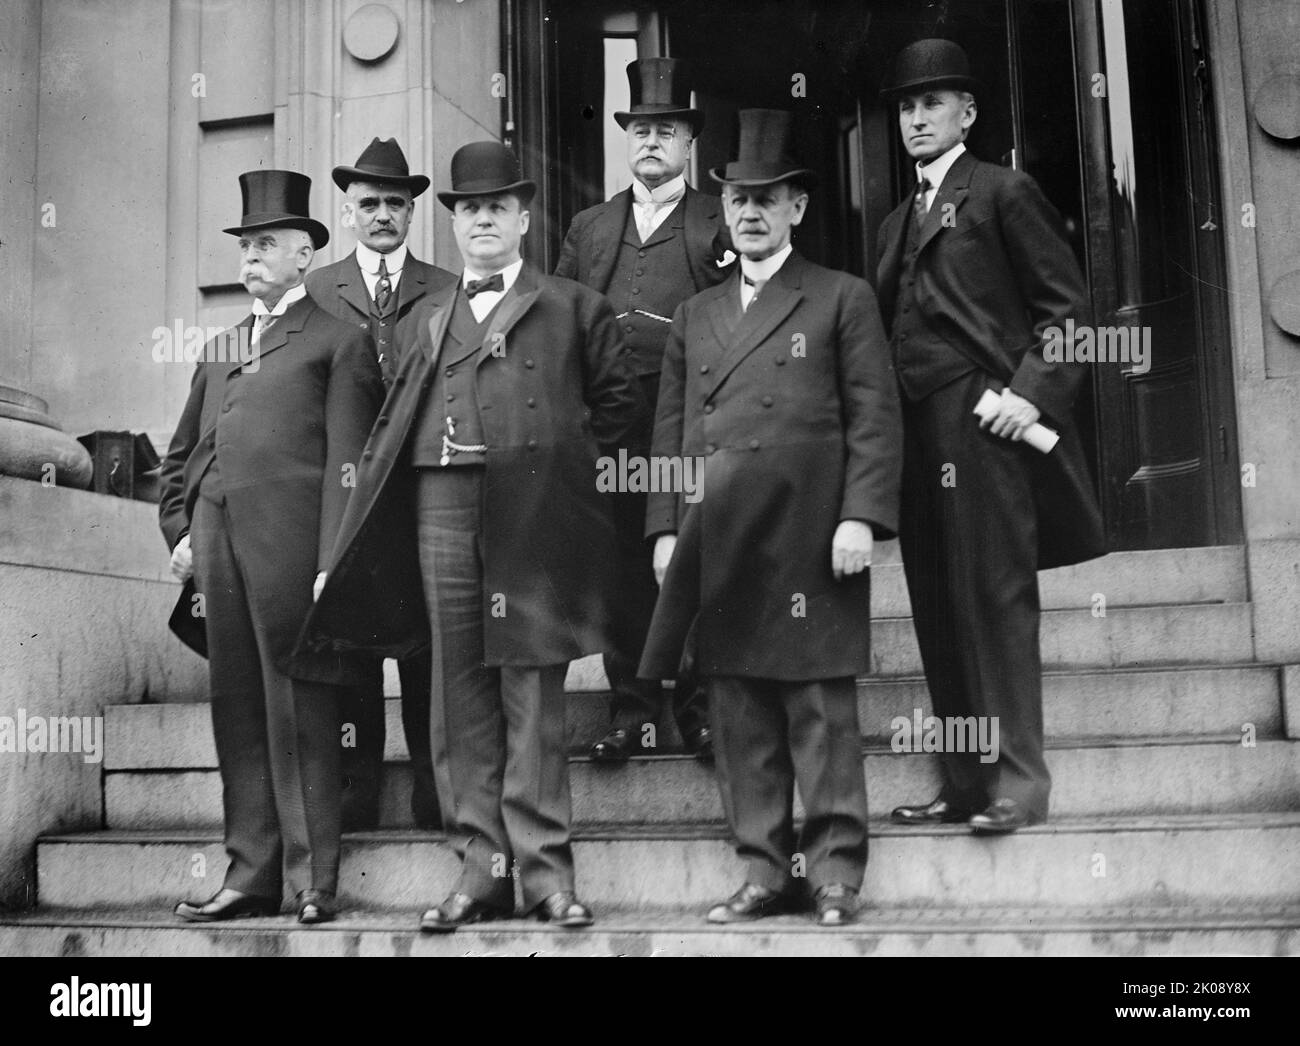 Governors. Jacob Harold Gallinger, Rep. from New Hampshire, Robert P. Bass, Governor of New Hampshire, Left Rear, 1912. [US politicians: Jacob Harold Gallinger, Representative 1885-1889, Senator 1891-1918, (left); farmer and forestry expert Robert Perkins Bass, Governor of New Hampshire 1911-1913]. Stock Photo